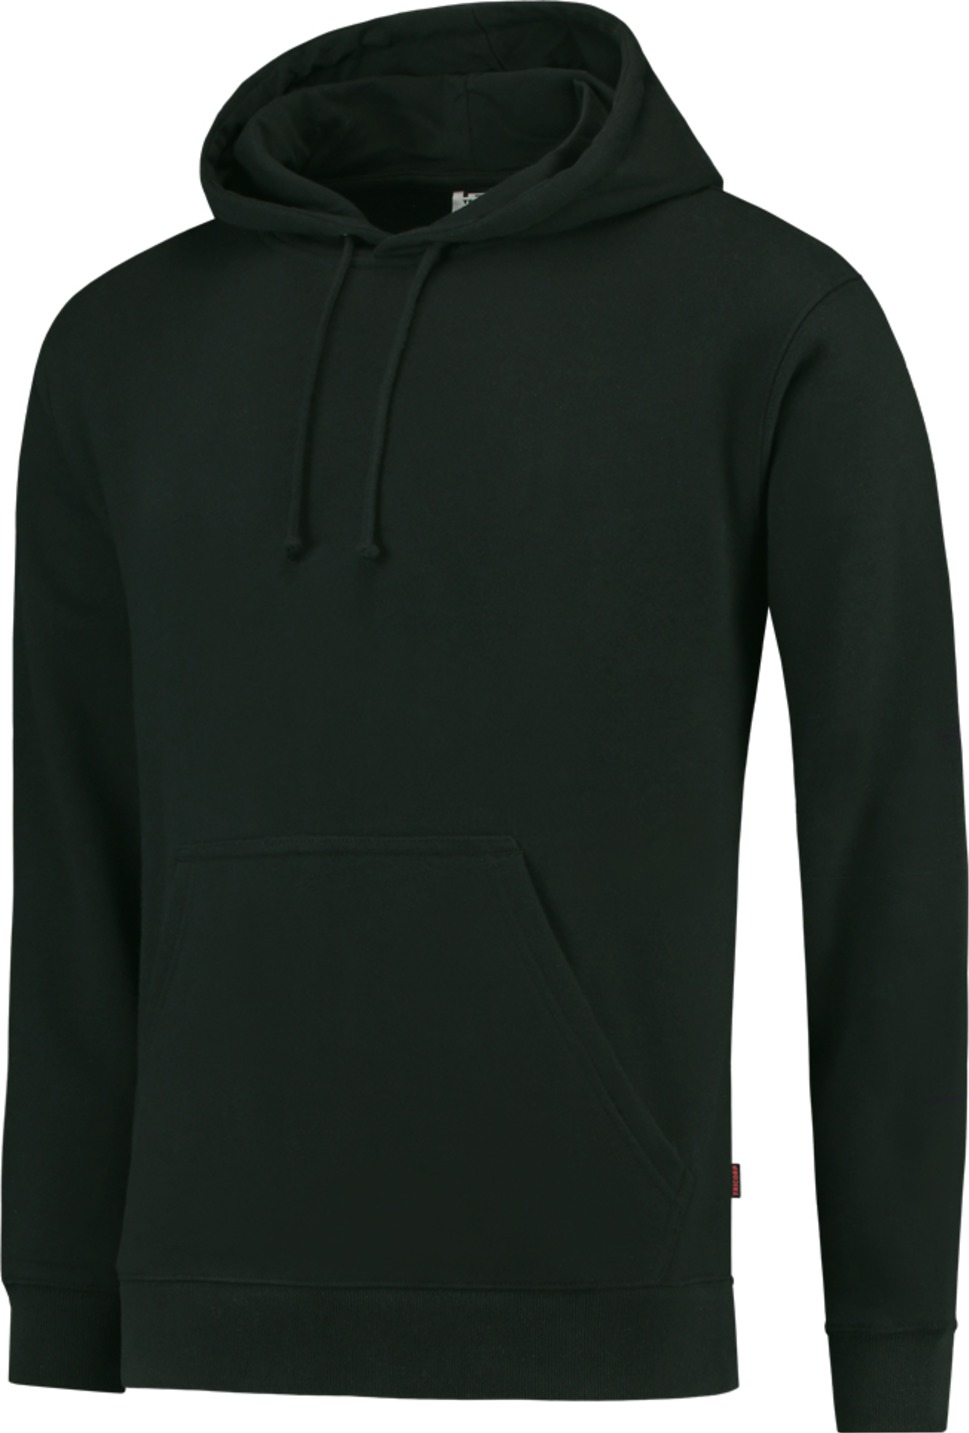 HS300 Hooded Sweater City Black